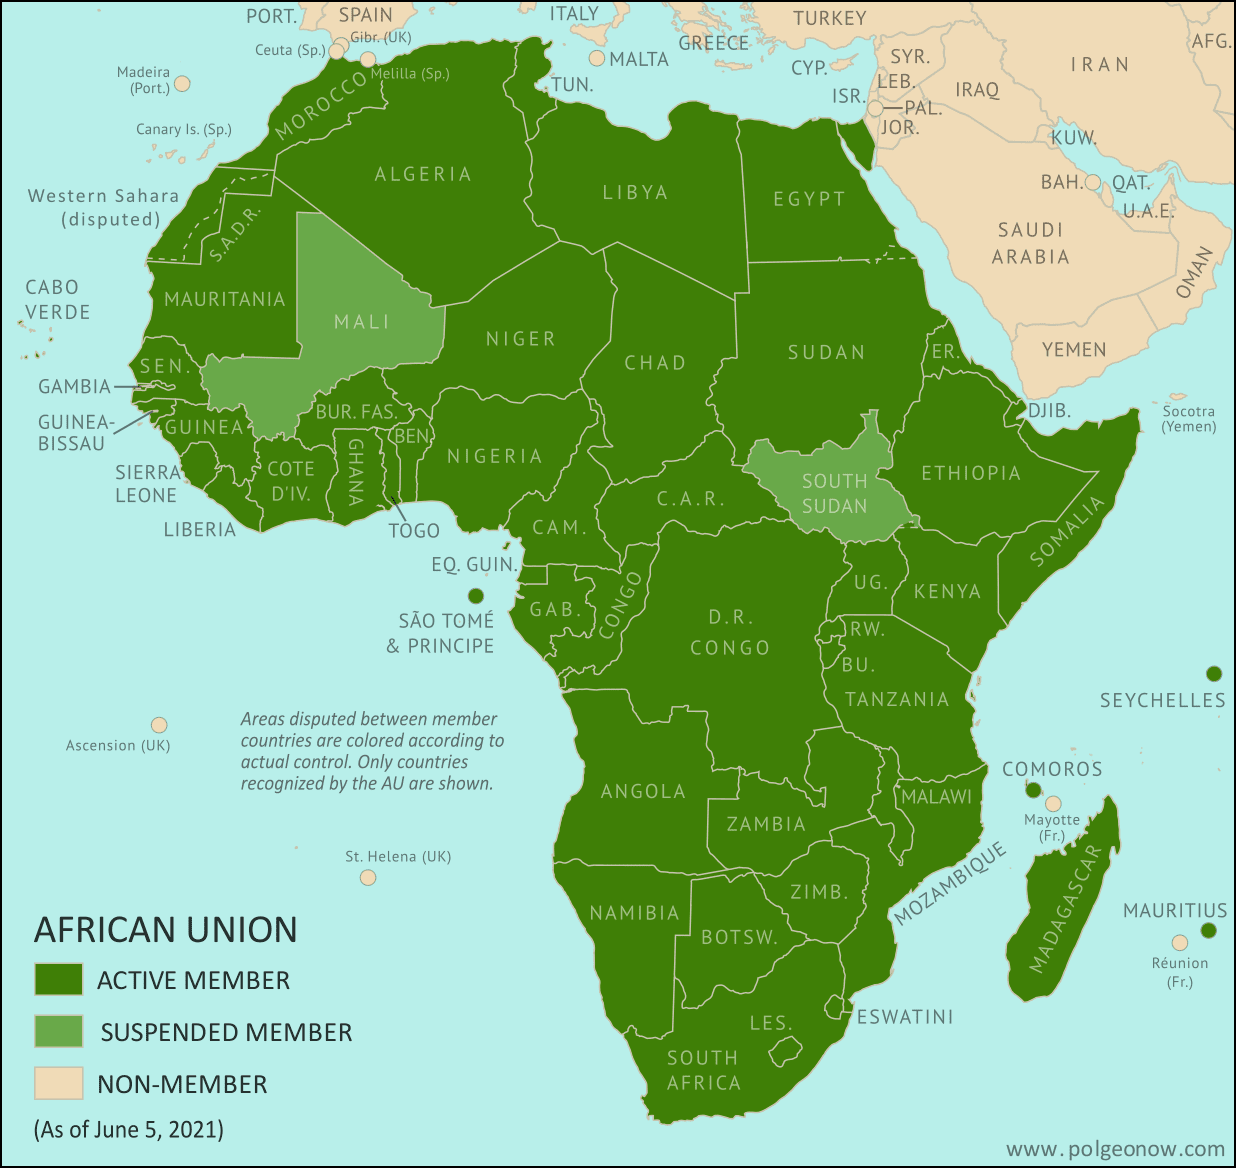 African Union: Map of Africa showing which countries are in the African Union in 2021, including active and suspended member countries and non-member territories. Updated for the June 2021 suspension of Mali (colorblind accessible).